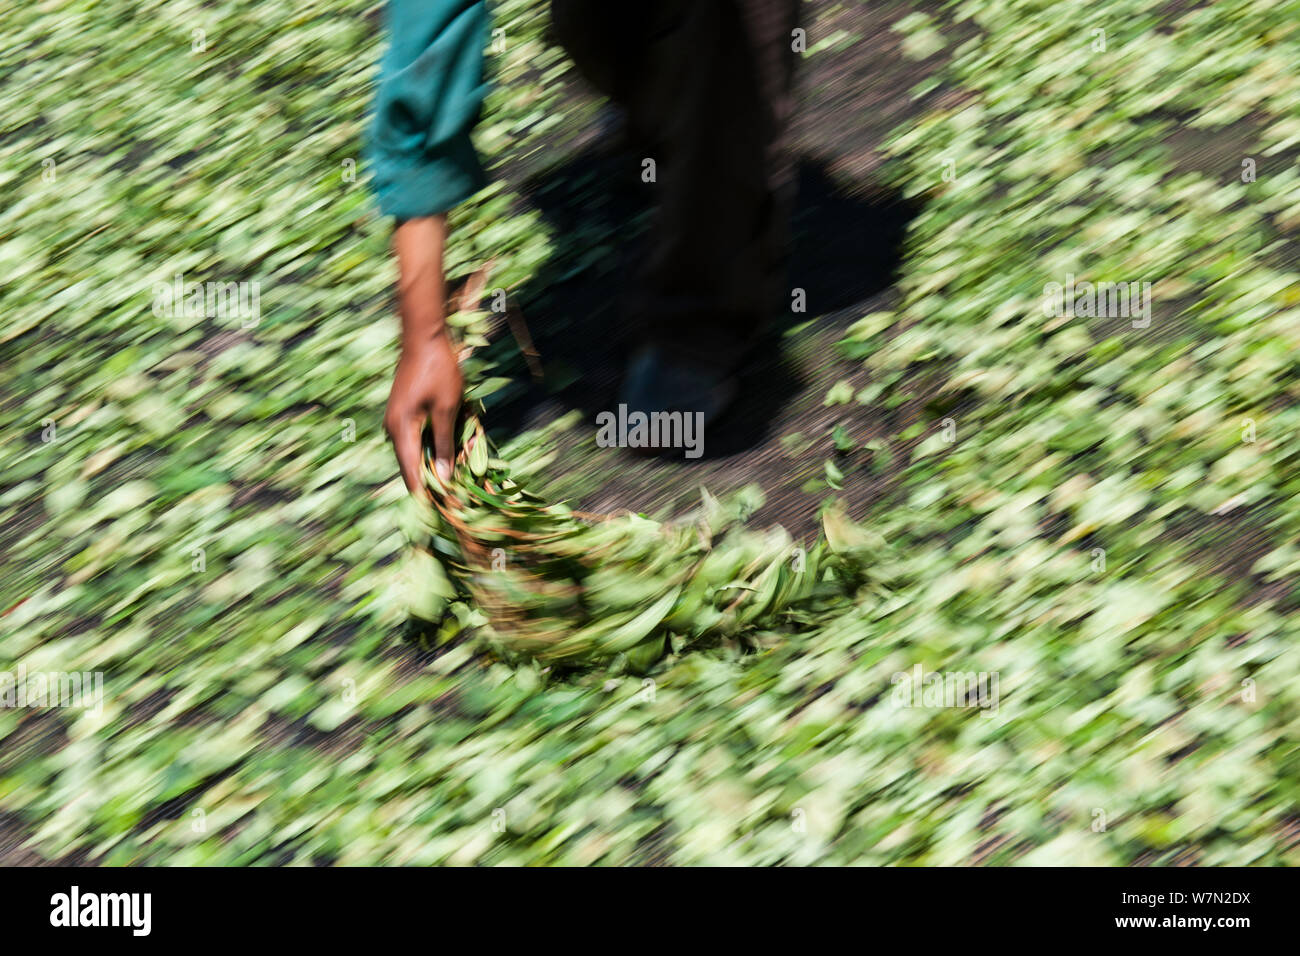 Man turning harvest of Coca (Erythroxylum coca) leaves to dry them in the sun, Bolivia, November Stock Photo